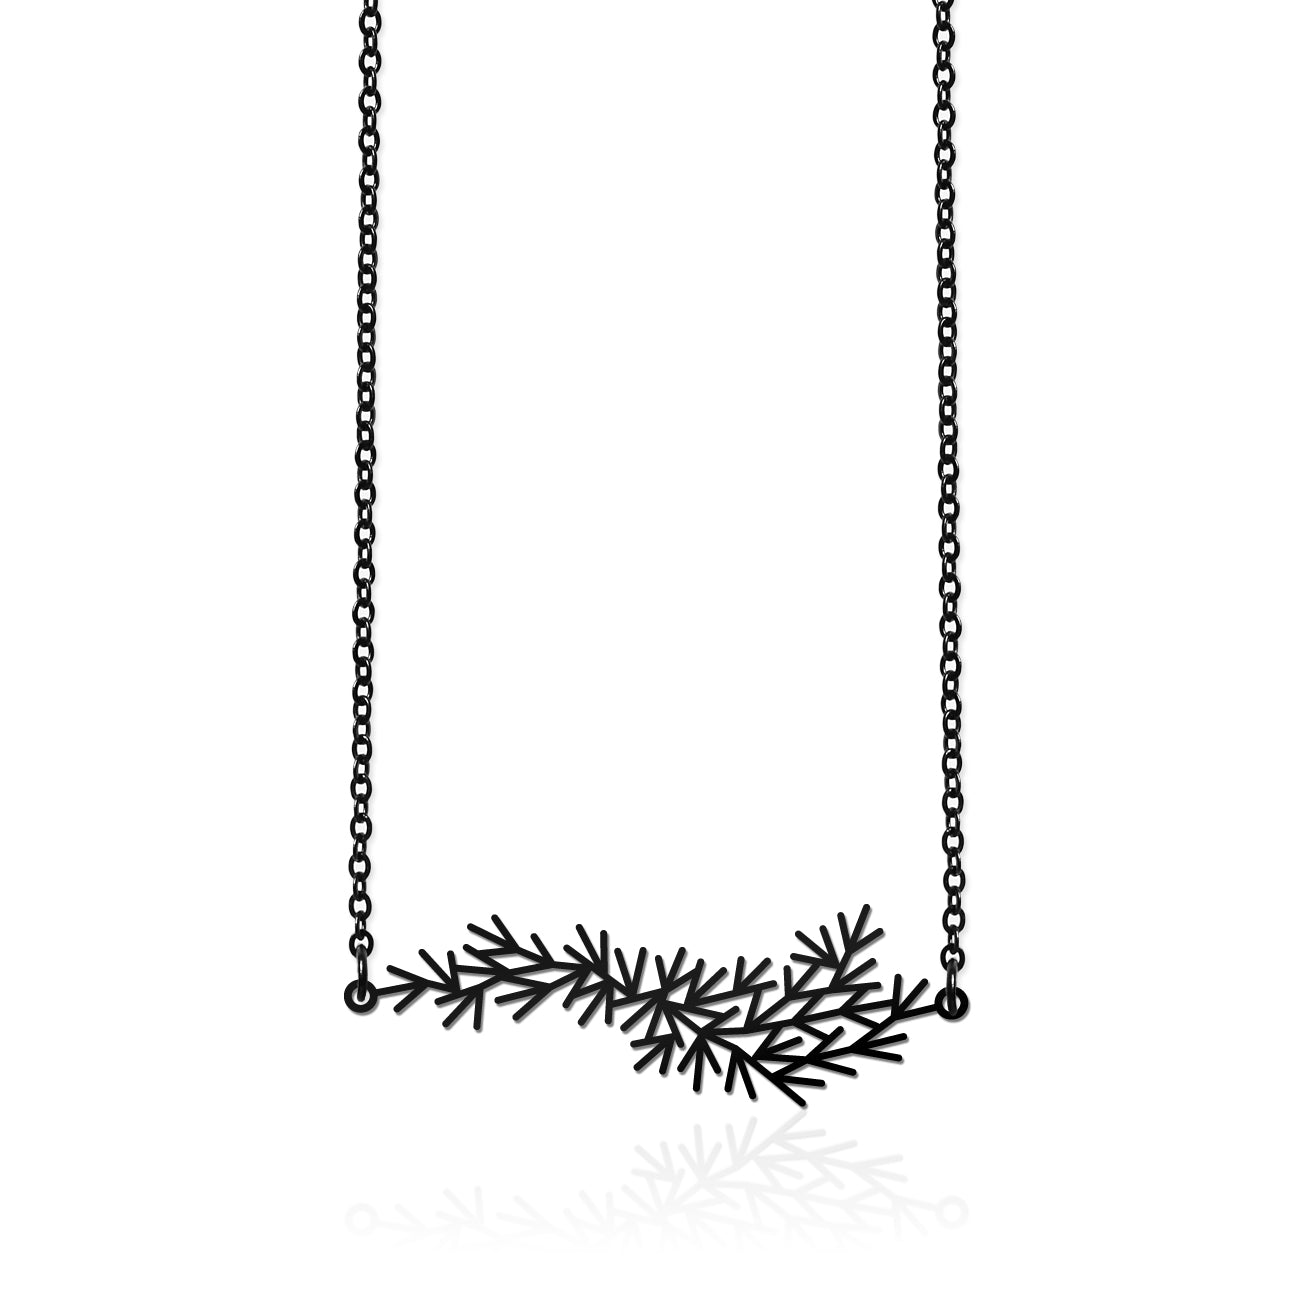 WATERWEEDS PENDANT SMALL BLACK WITH CHAIN